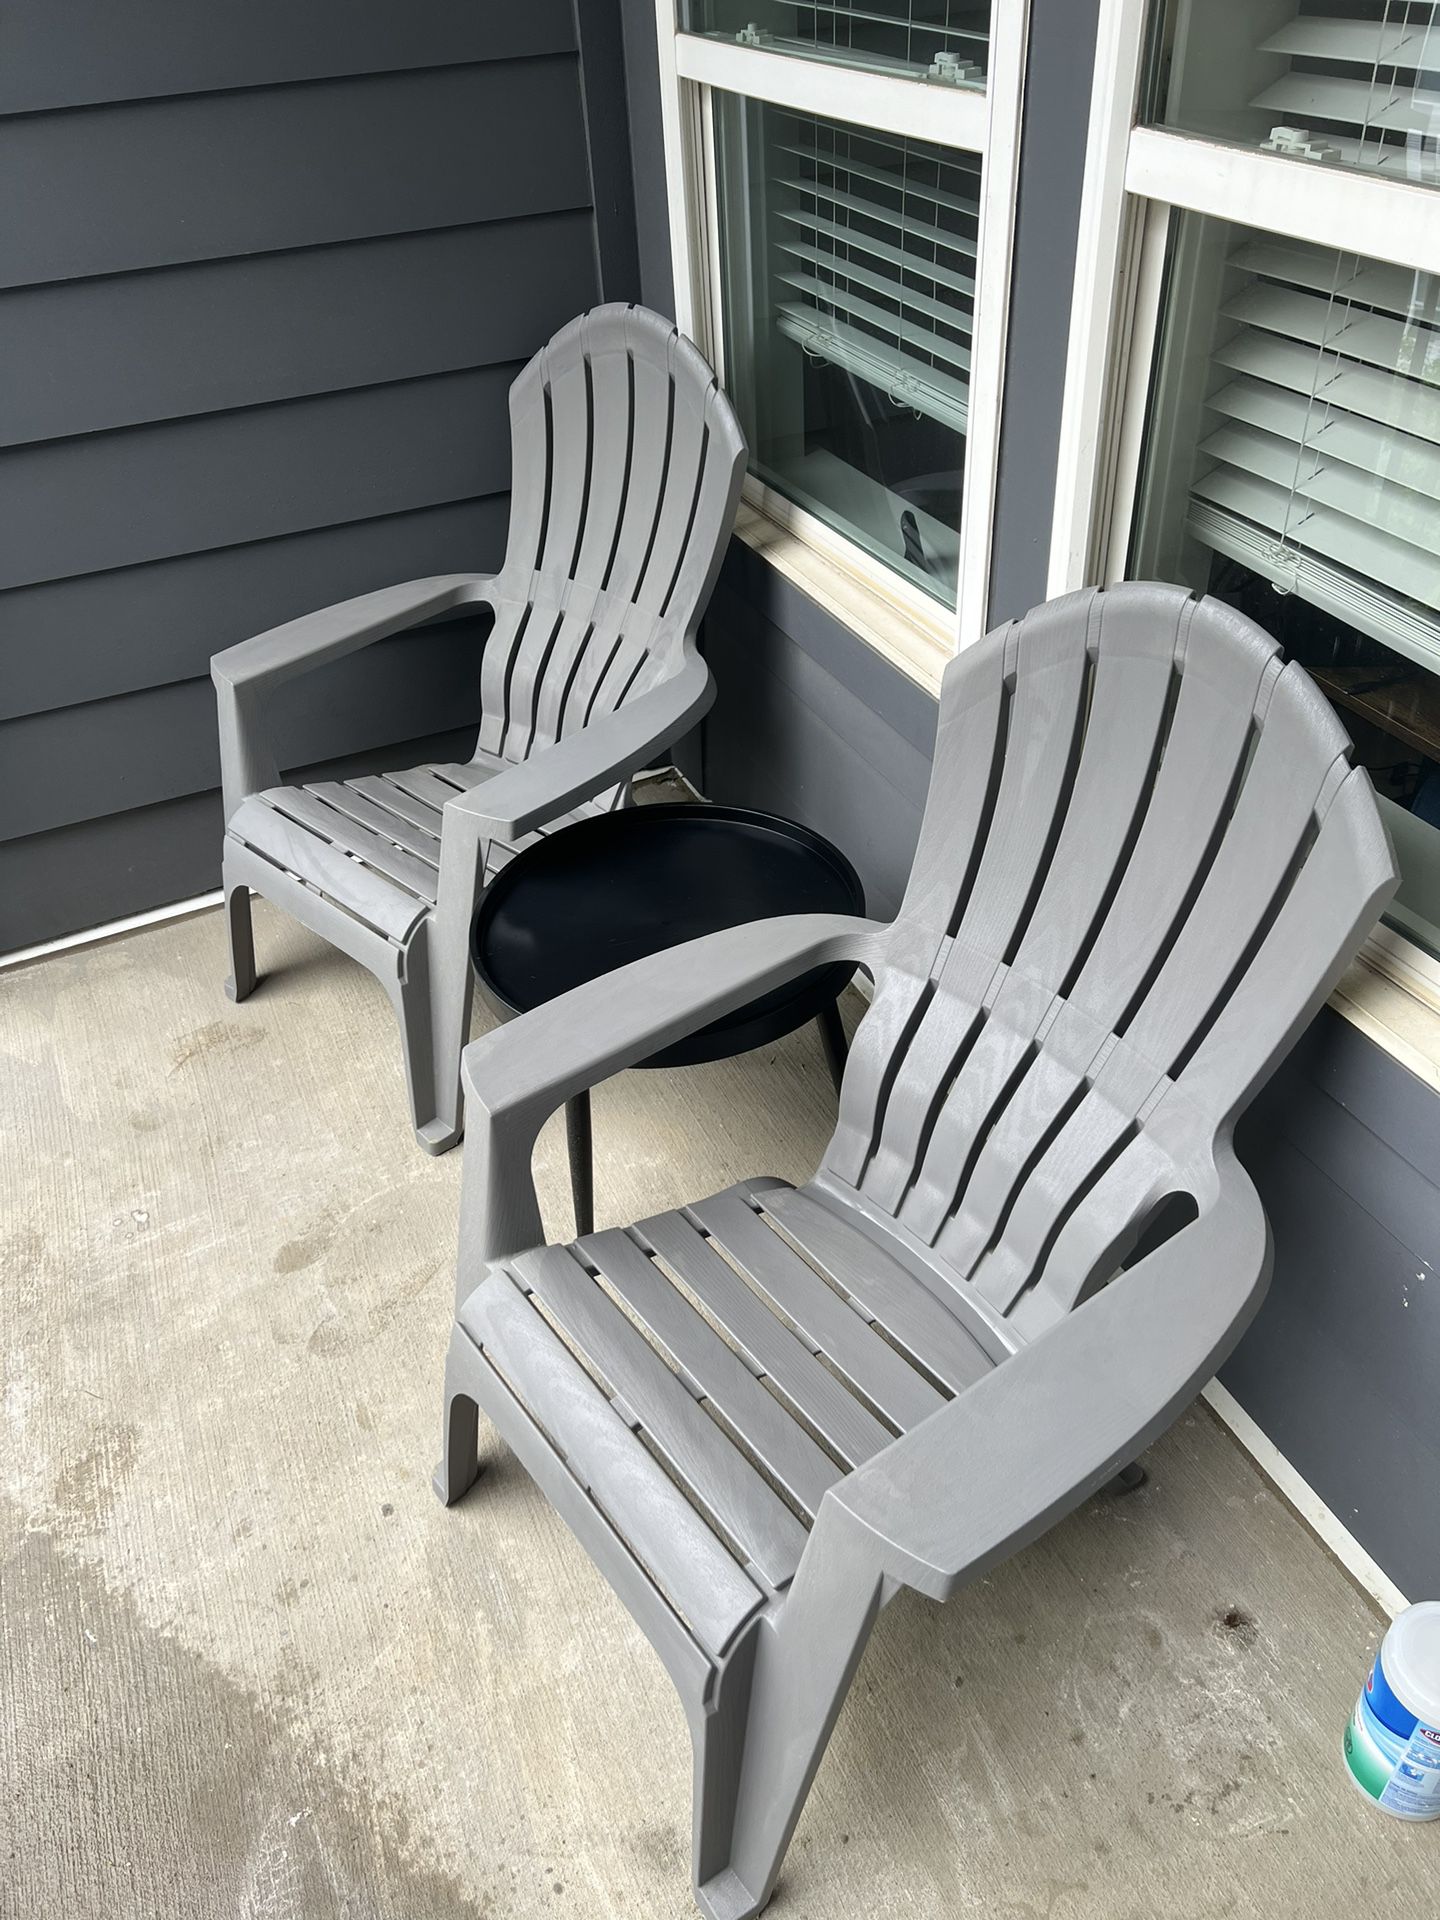 2 Gray Adirondack Chairs And Table  